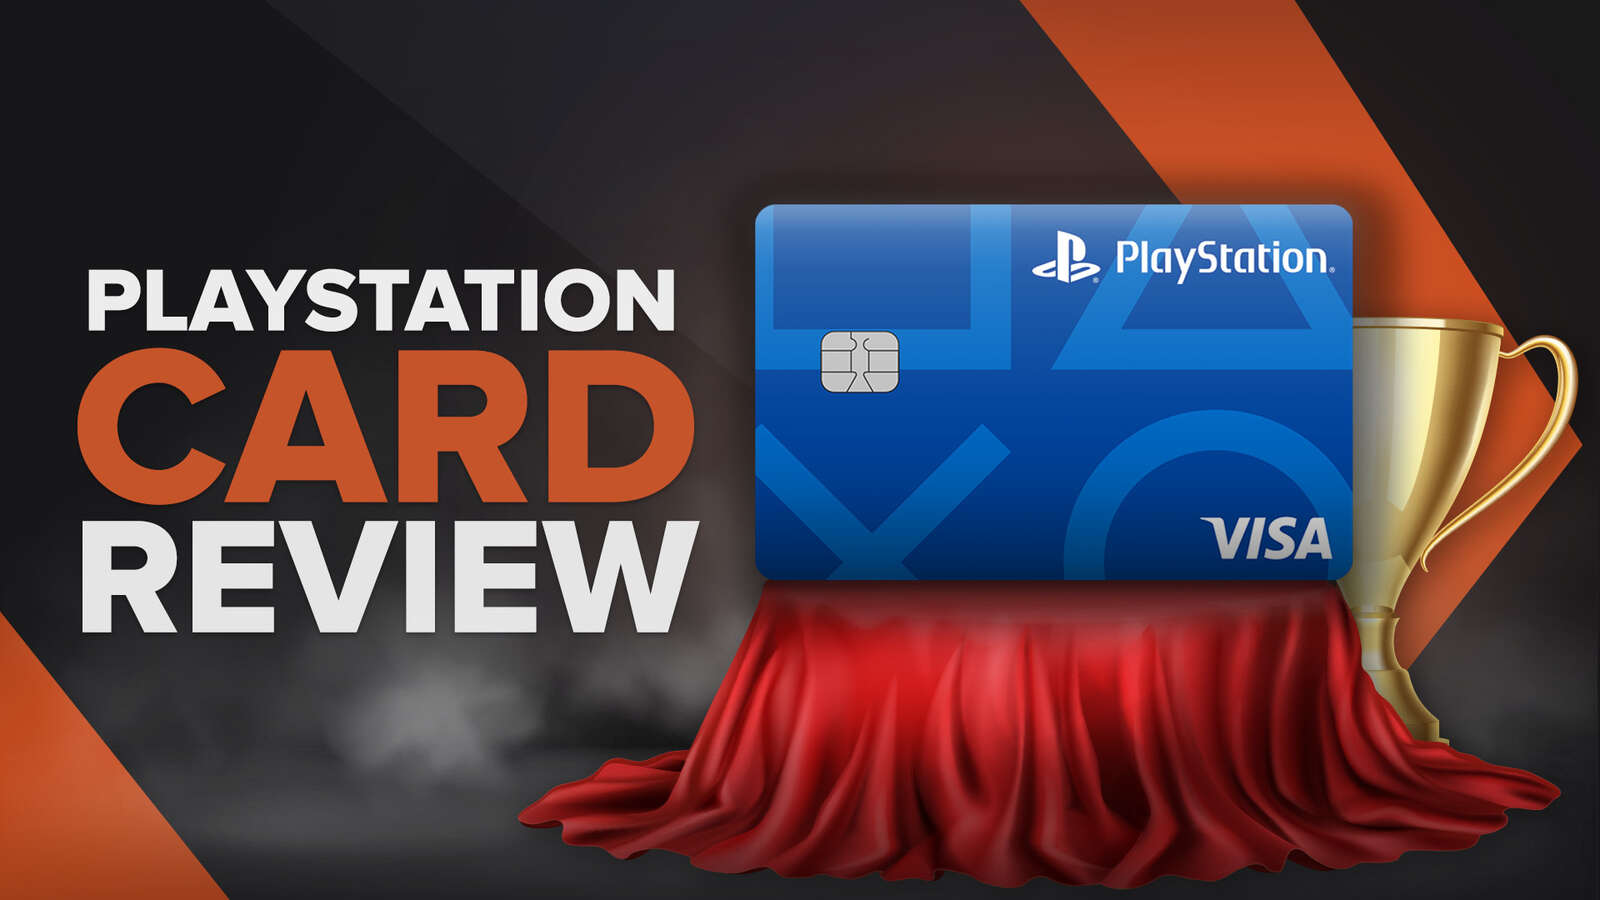 Is a PlayStation Visa Credit Card Worth It? [PlayStation Card Review]